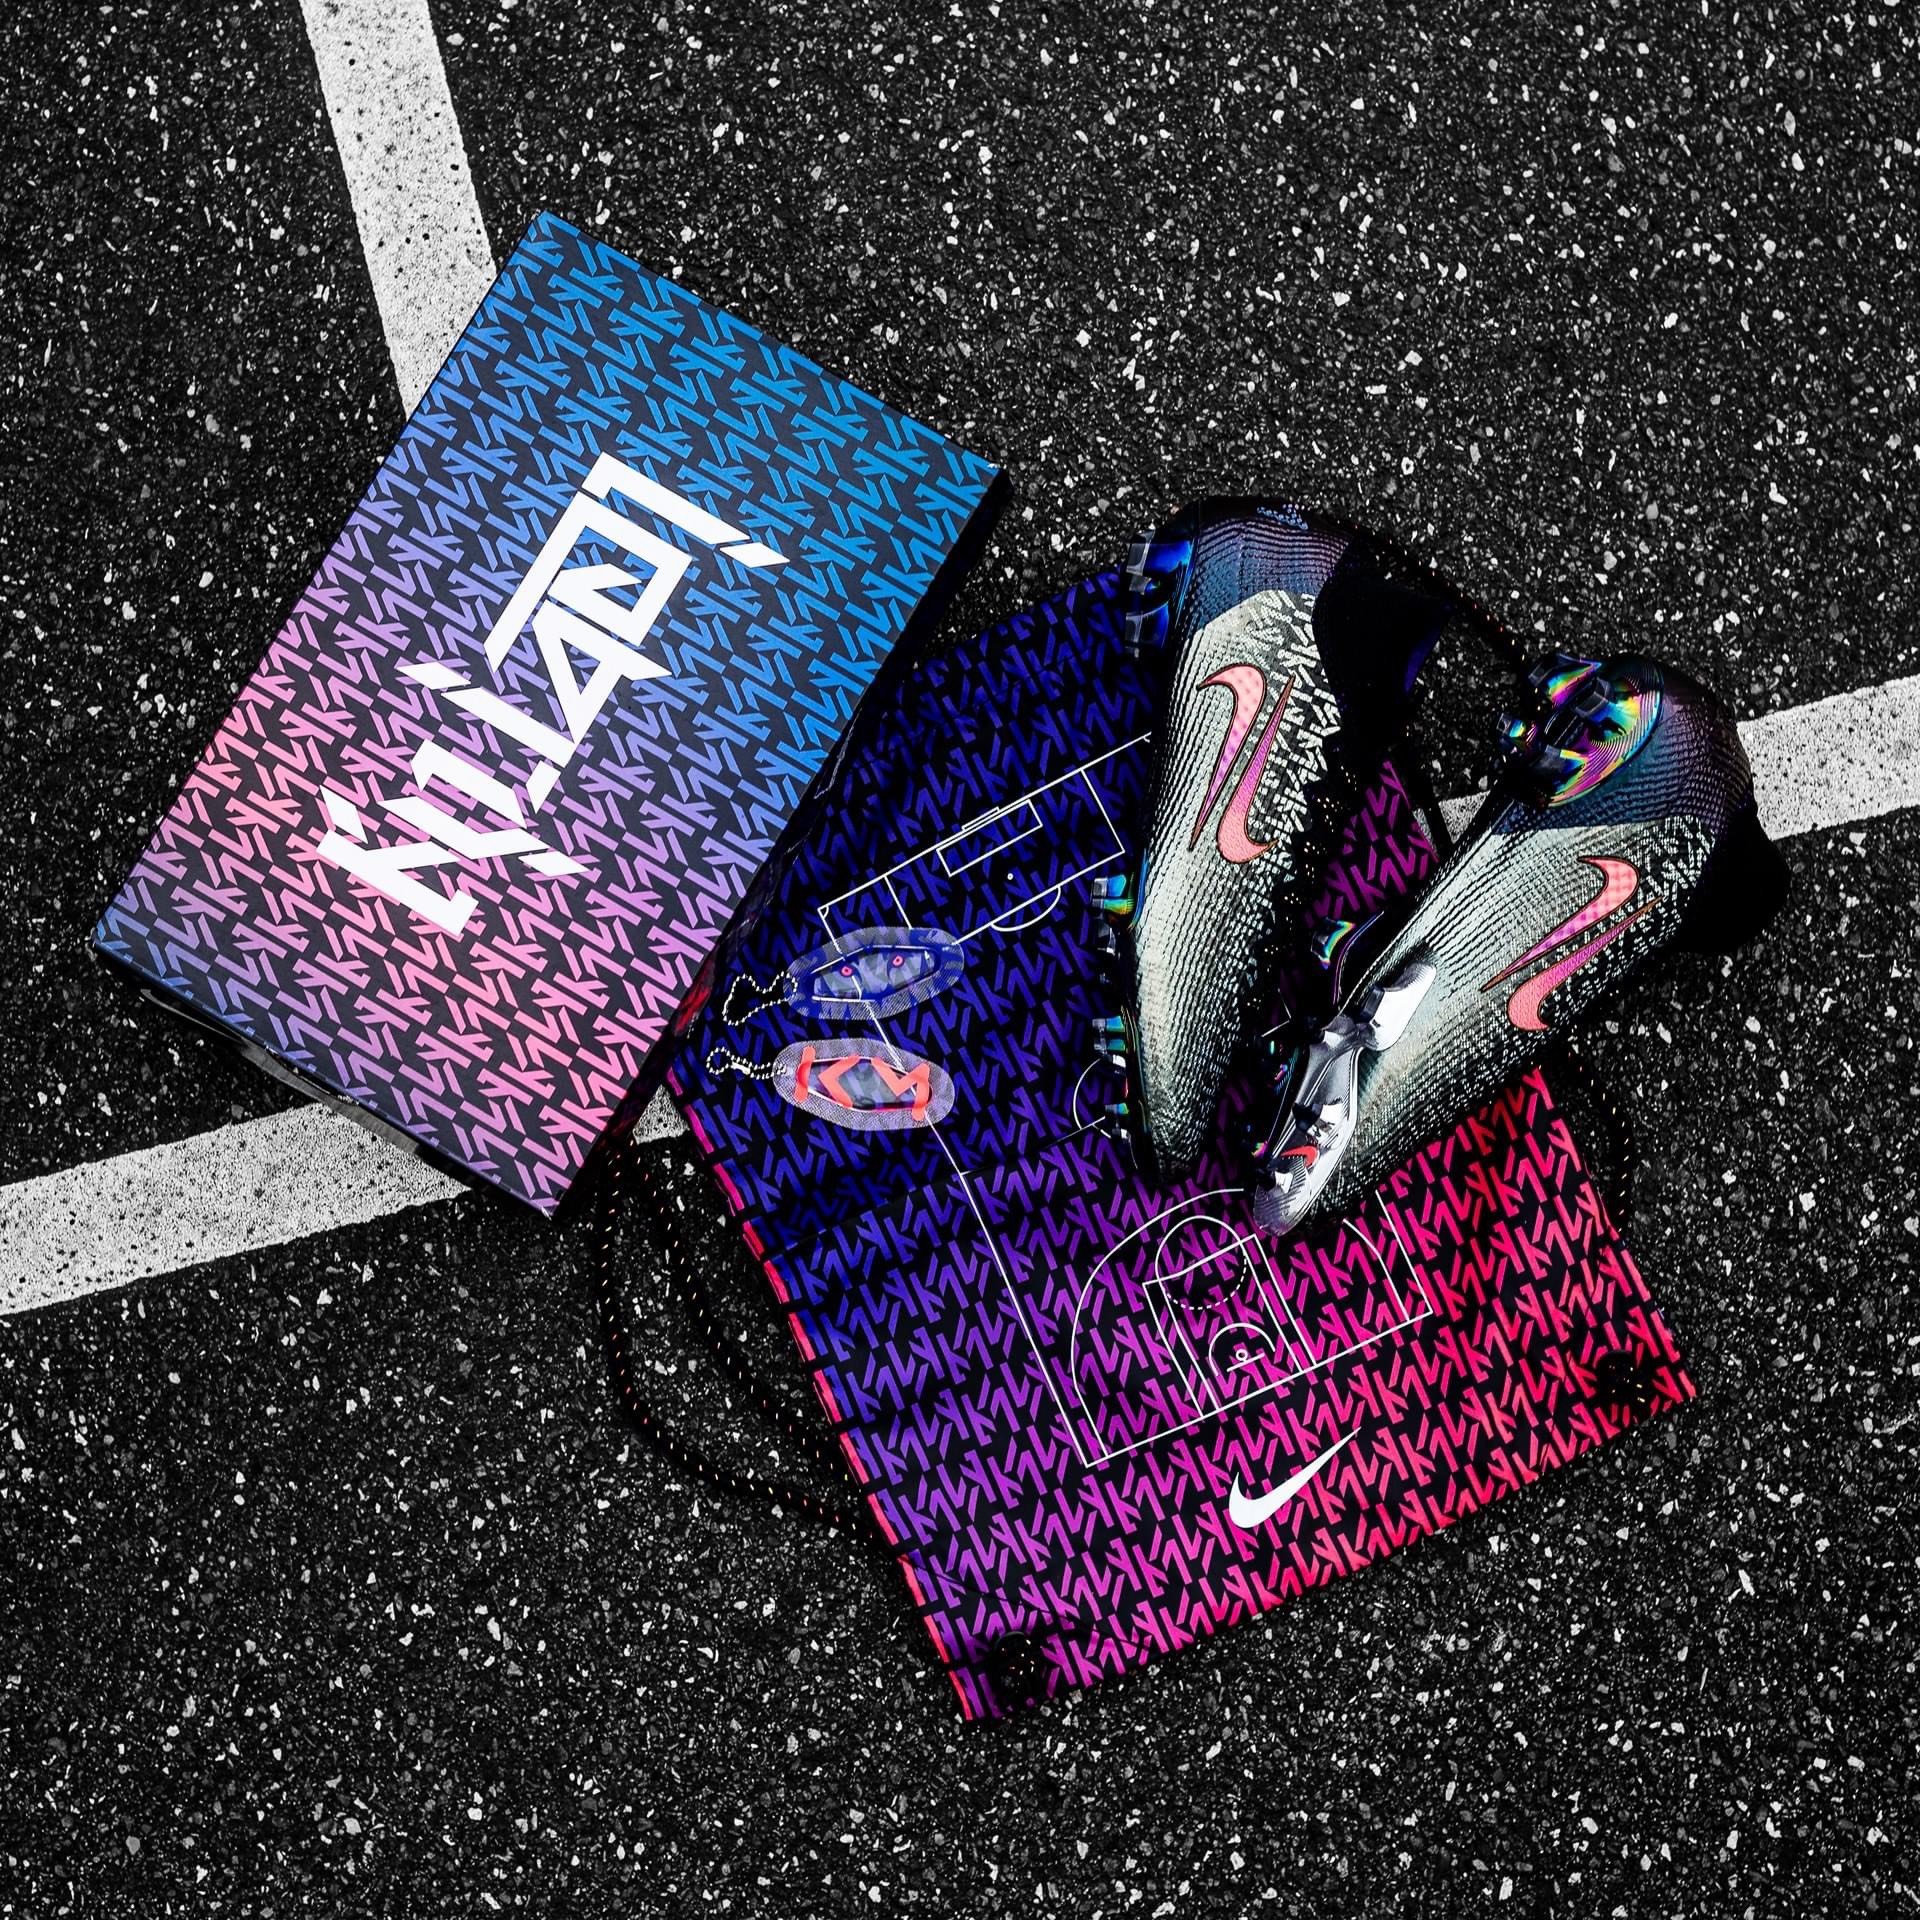 Colorful packaging for the LBJ x KM “Chosen 2” Collection